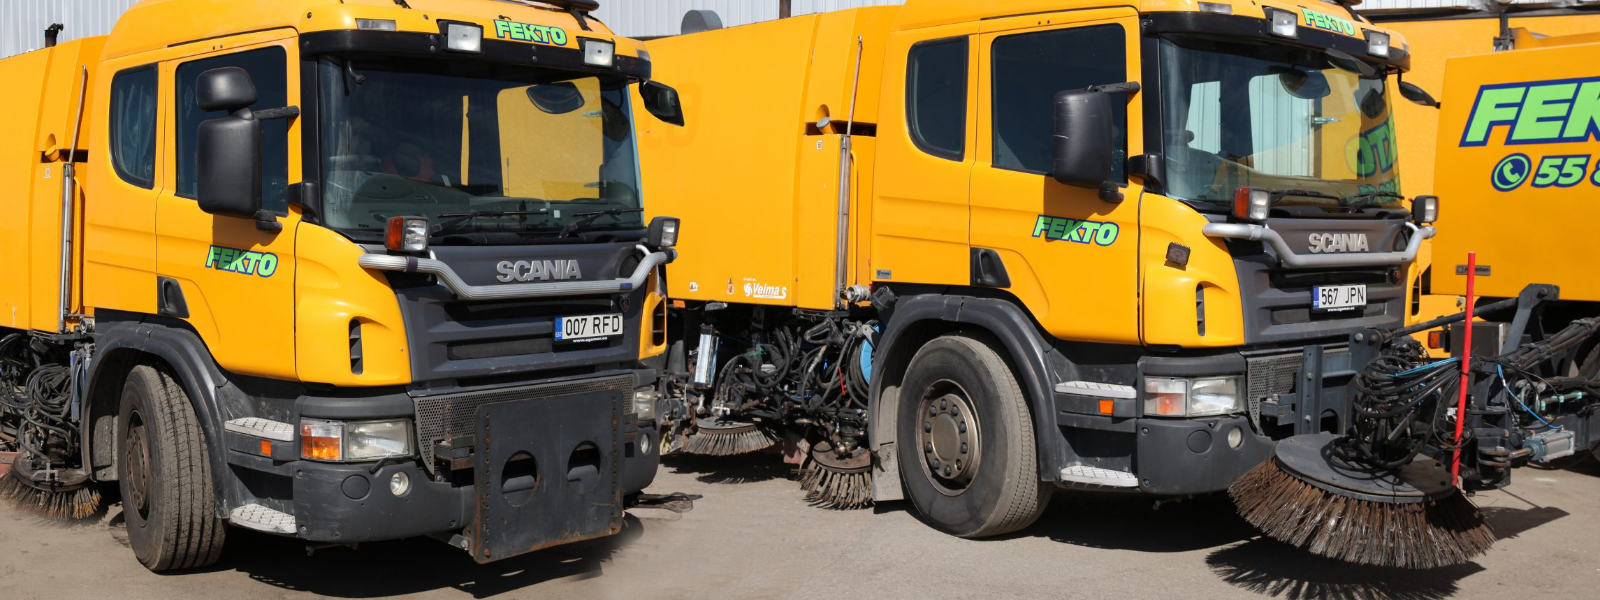 FEKTO OÜ - We specialize in the transport of waste, waste management, and a variety of general and home services, includi...